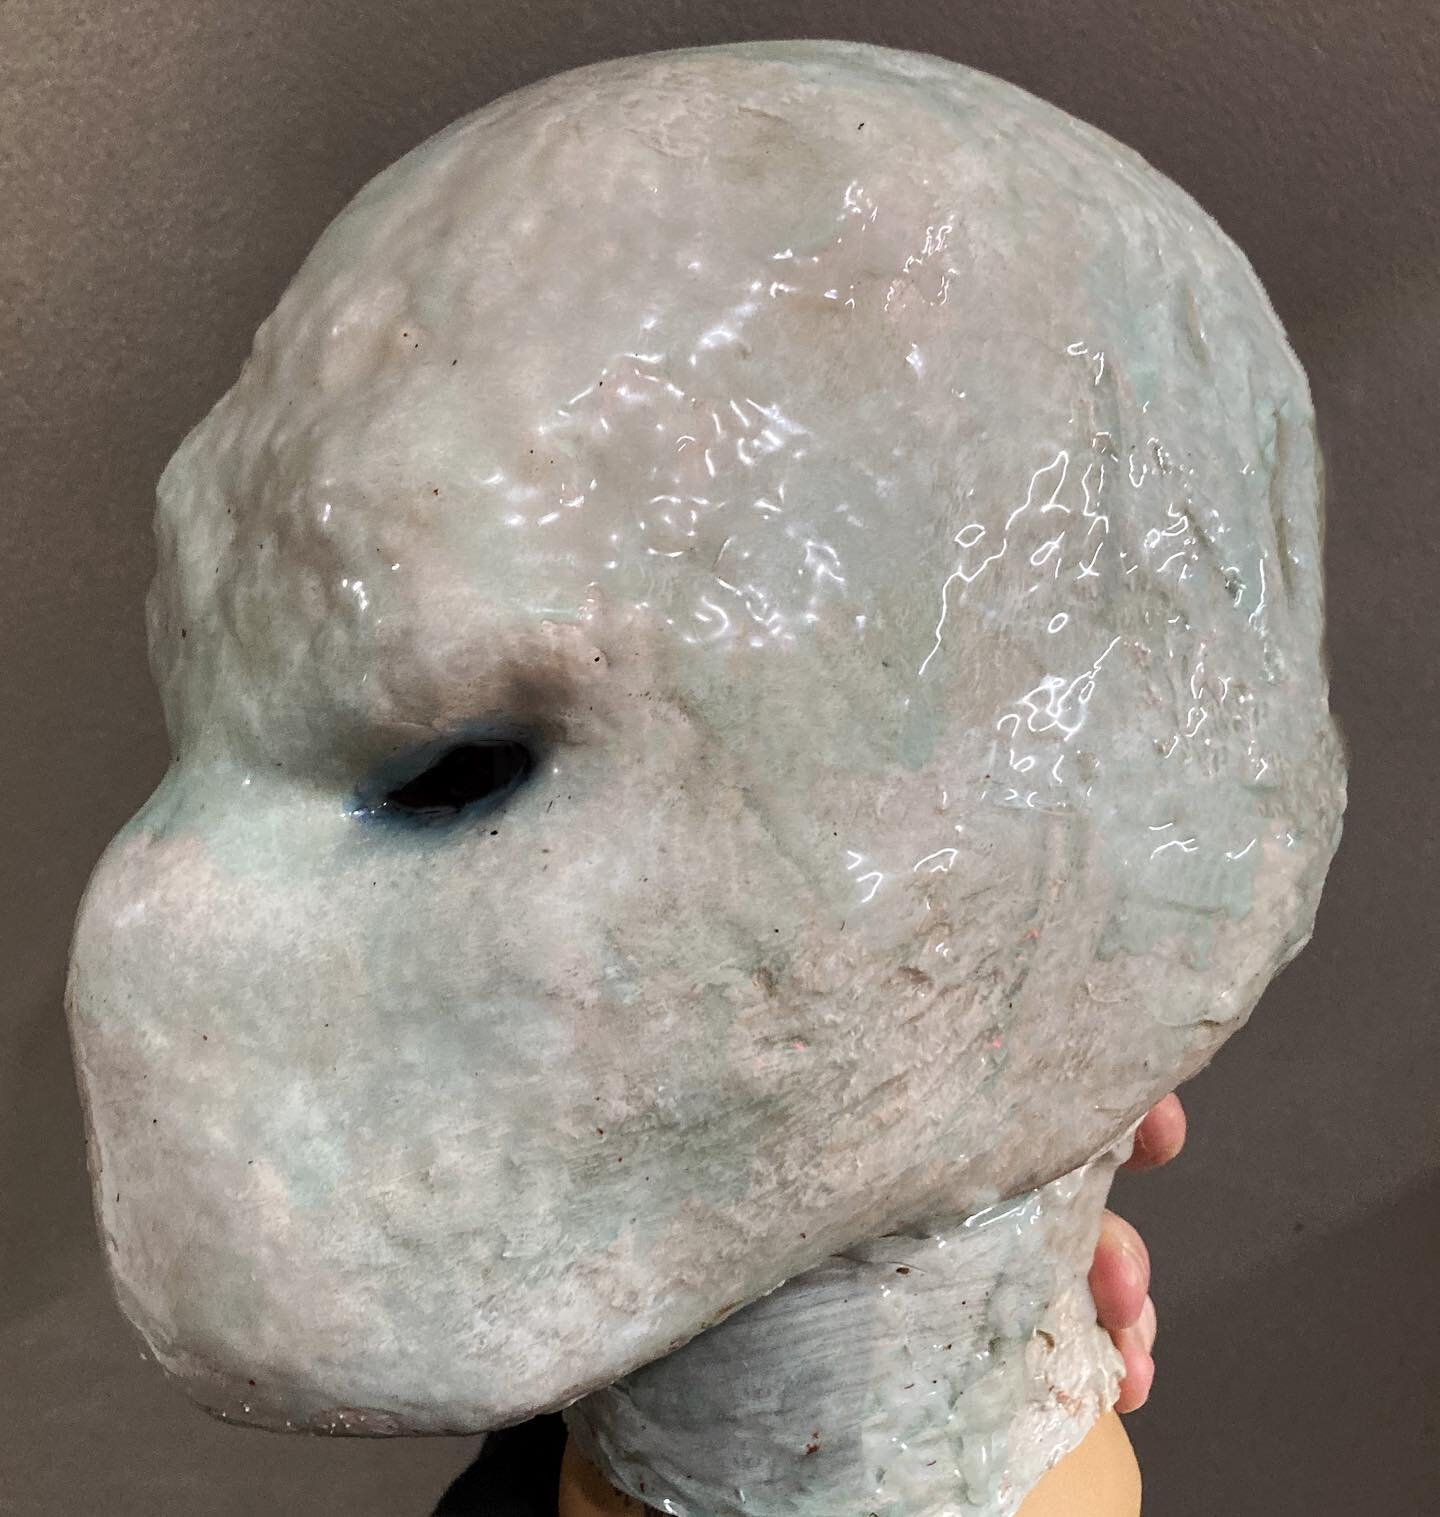 The silicone cast and paint up! This was an immensely fun piece to work on. It was ultimately a fairly simple design, which wound up playing on distorting real facial structure to end up with something uncanny and unsettling that didn&rsquo;t have an